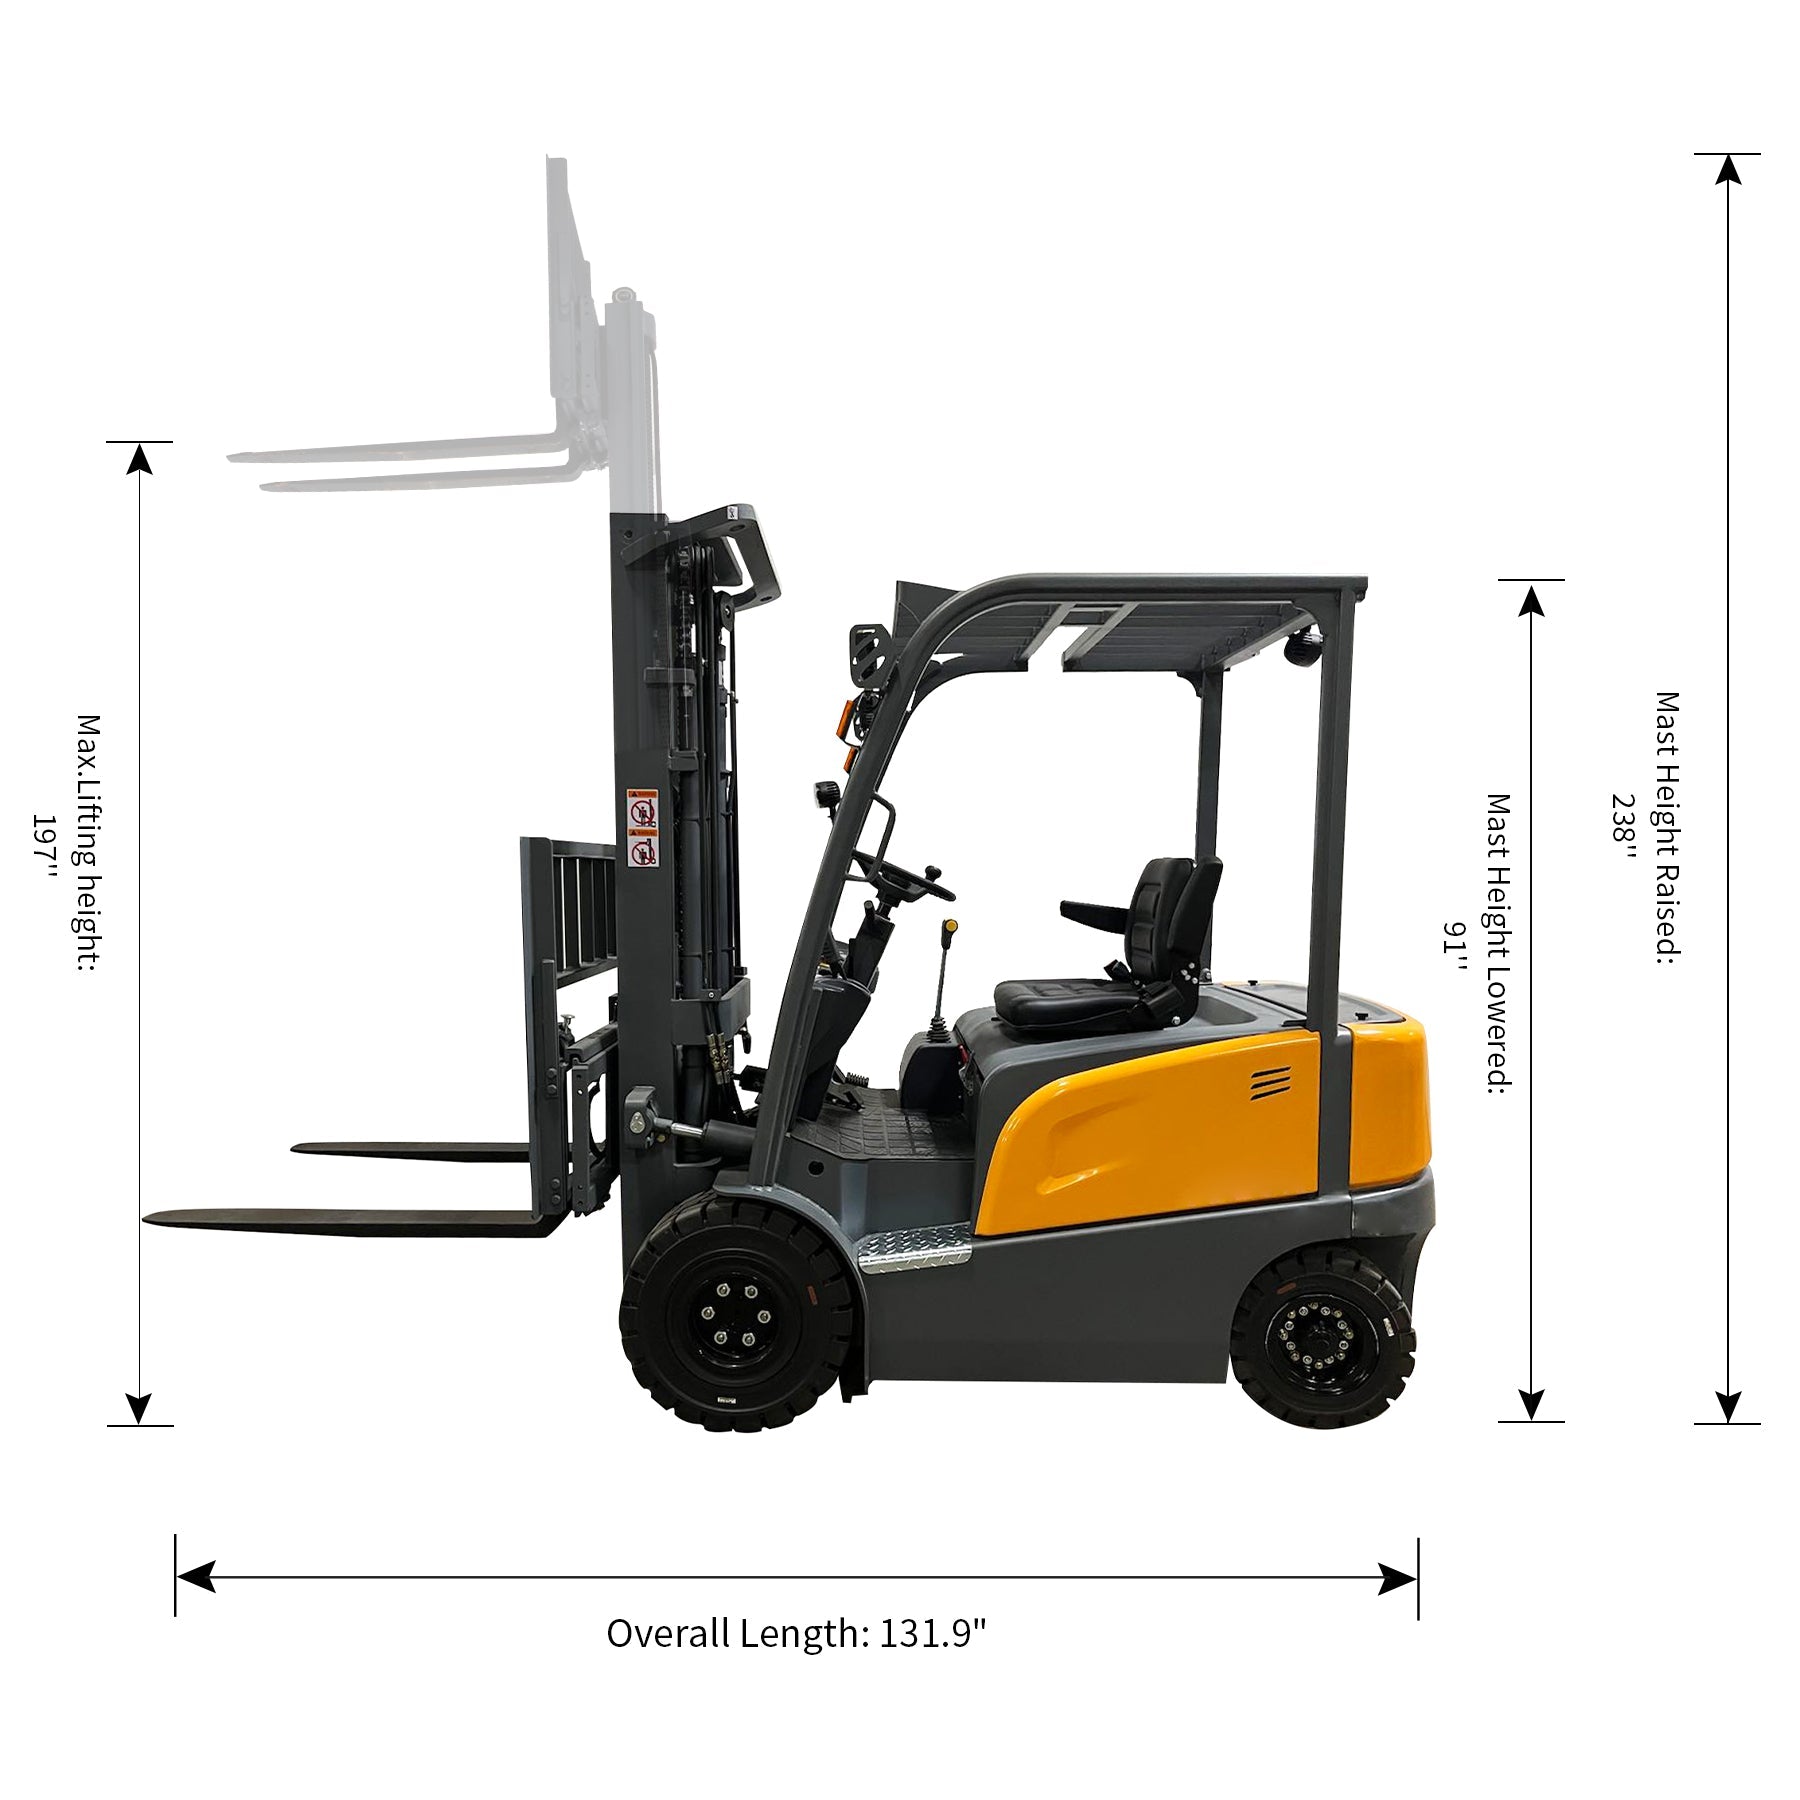 ApolloLift | Lead acid Battery 4-wheel Electric Forklift 5500lbs Cap. 197" Lifting A-4004